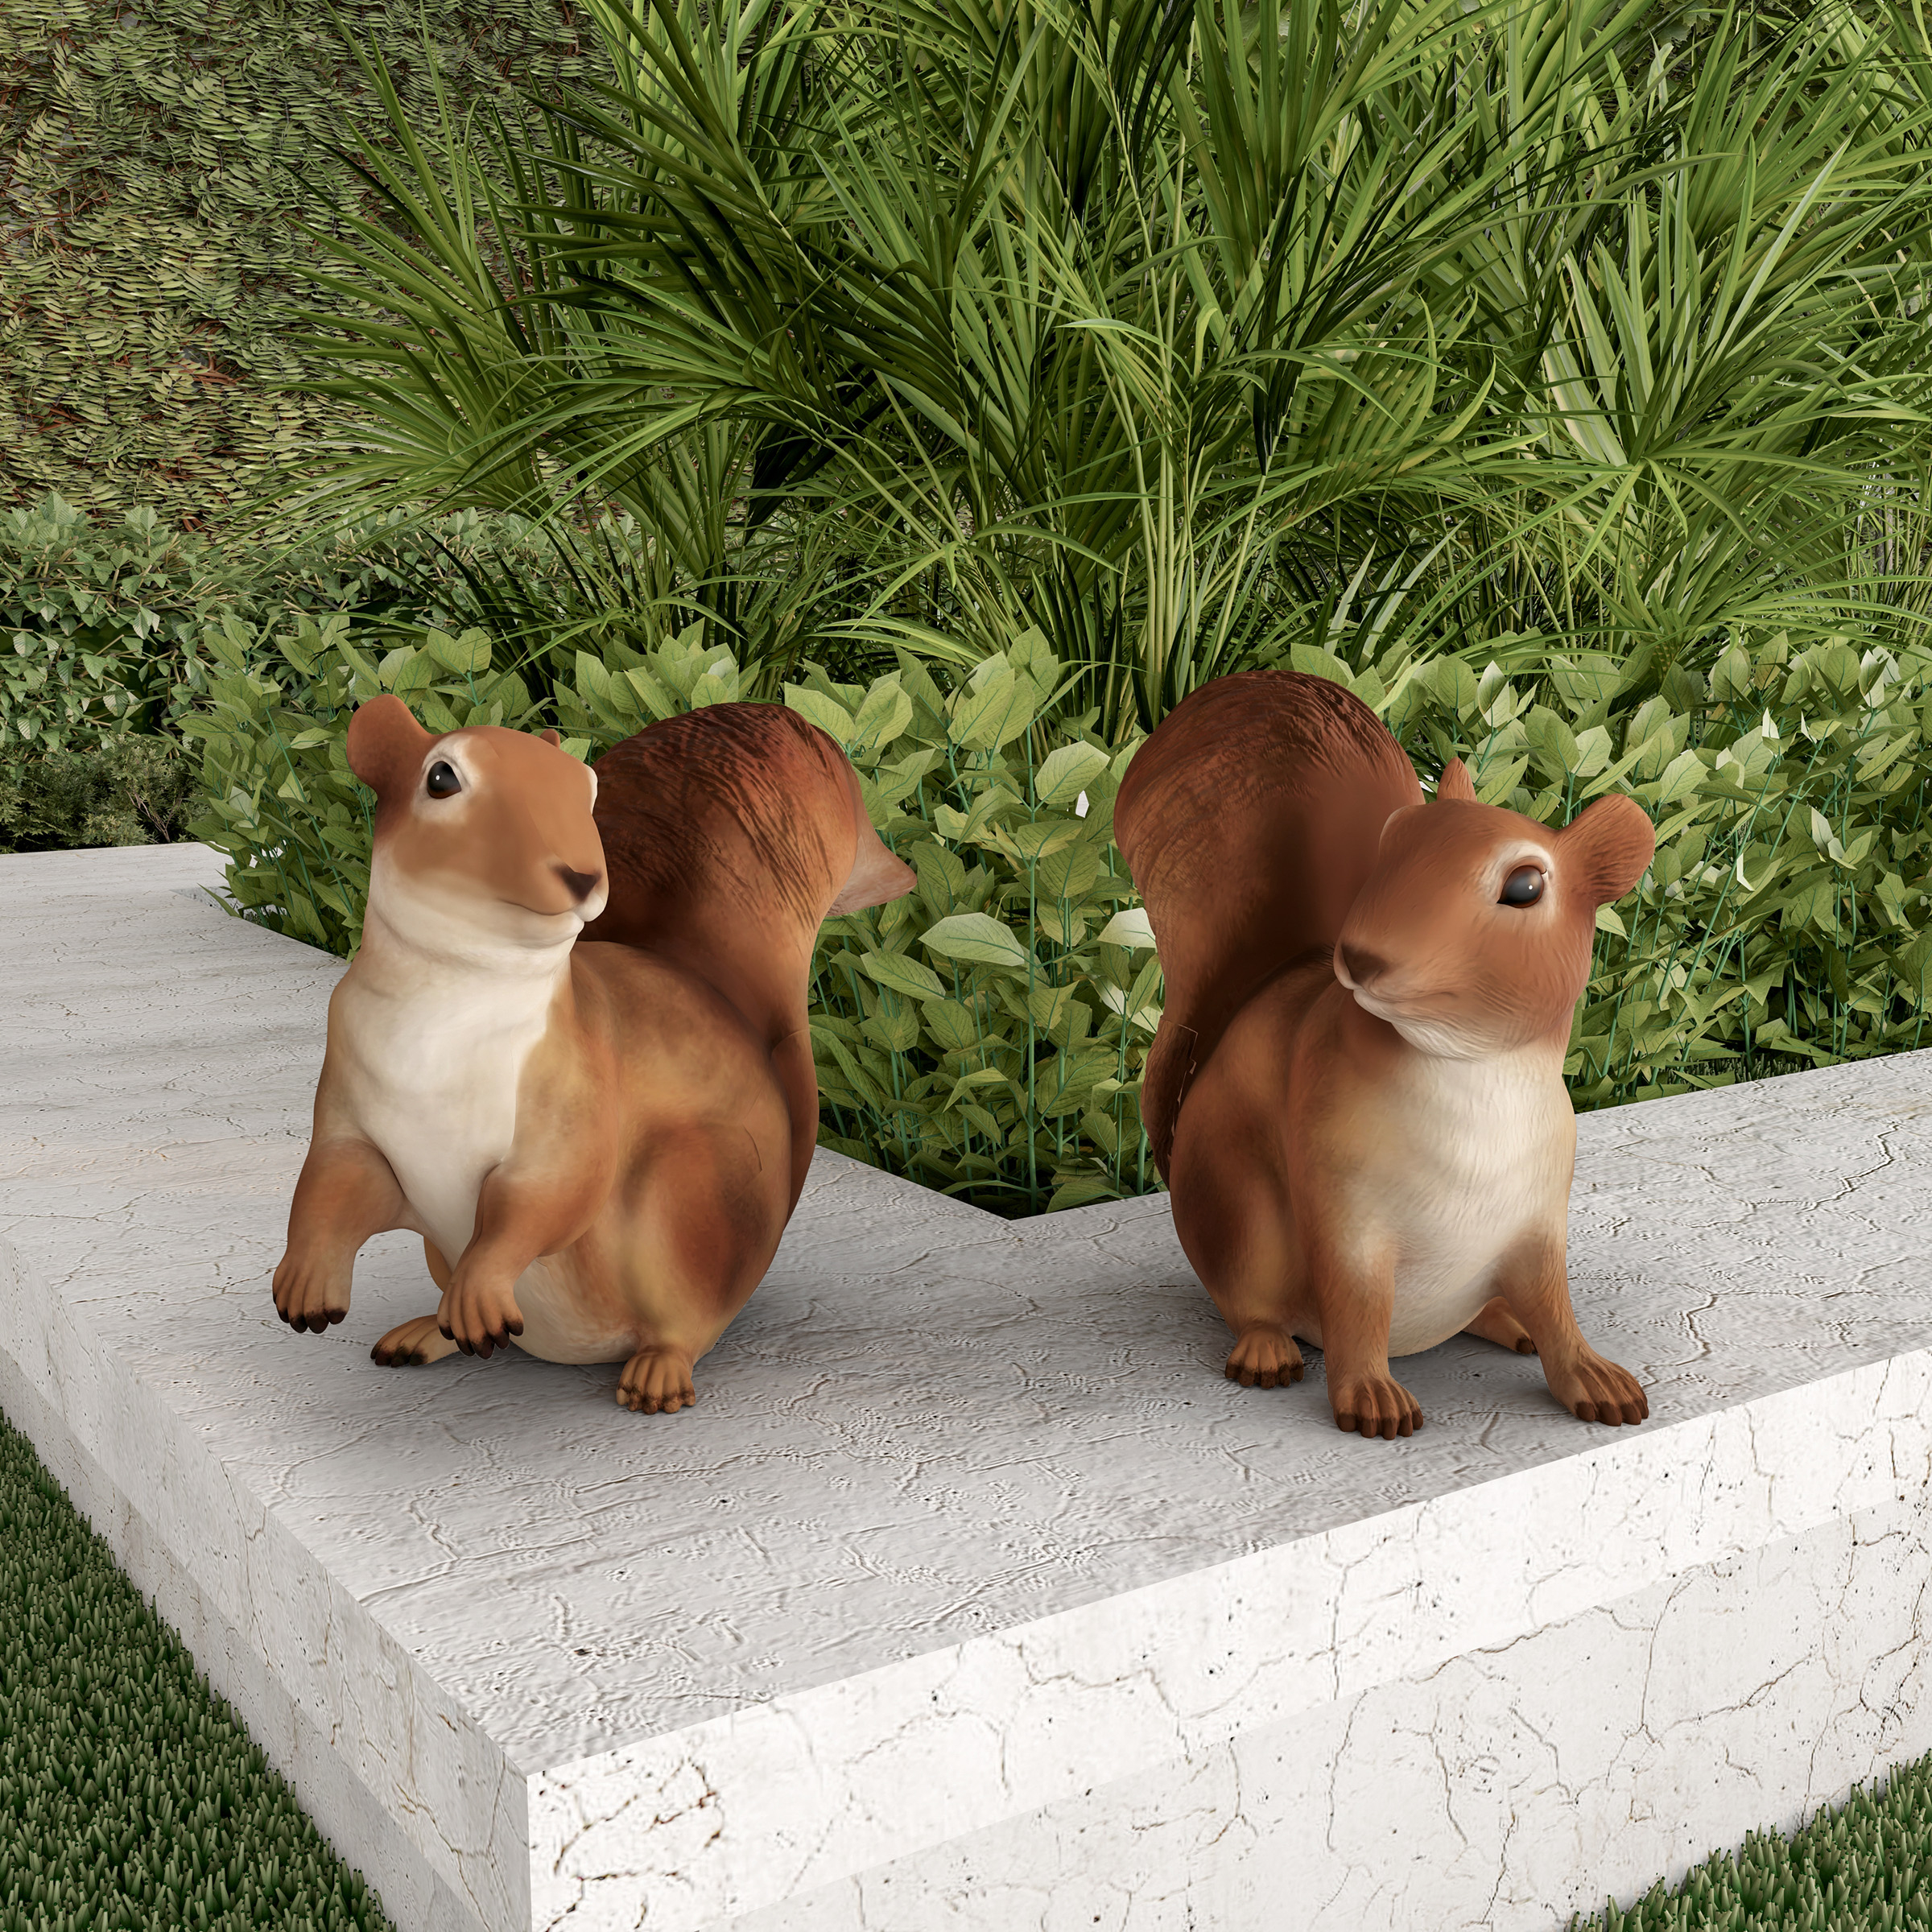 2 Squirrel Statues Resin Animal Figurines For Garden Flower Bed Outdoor Lawn